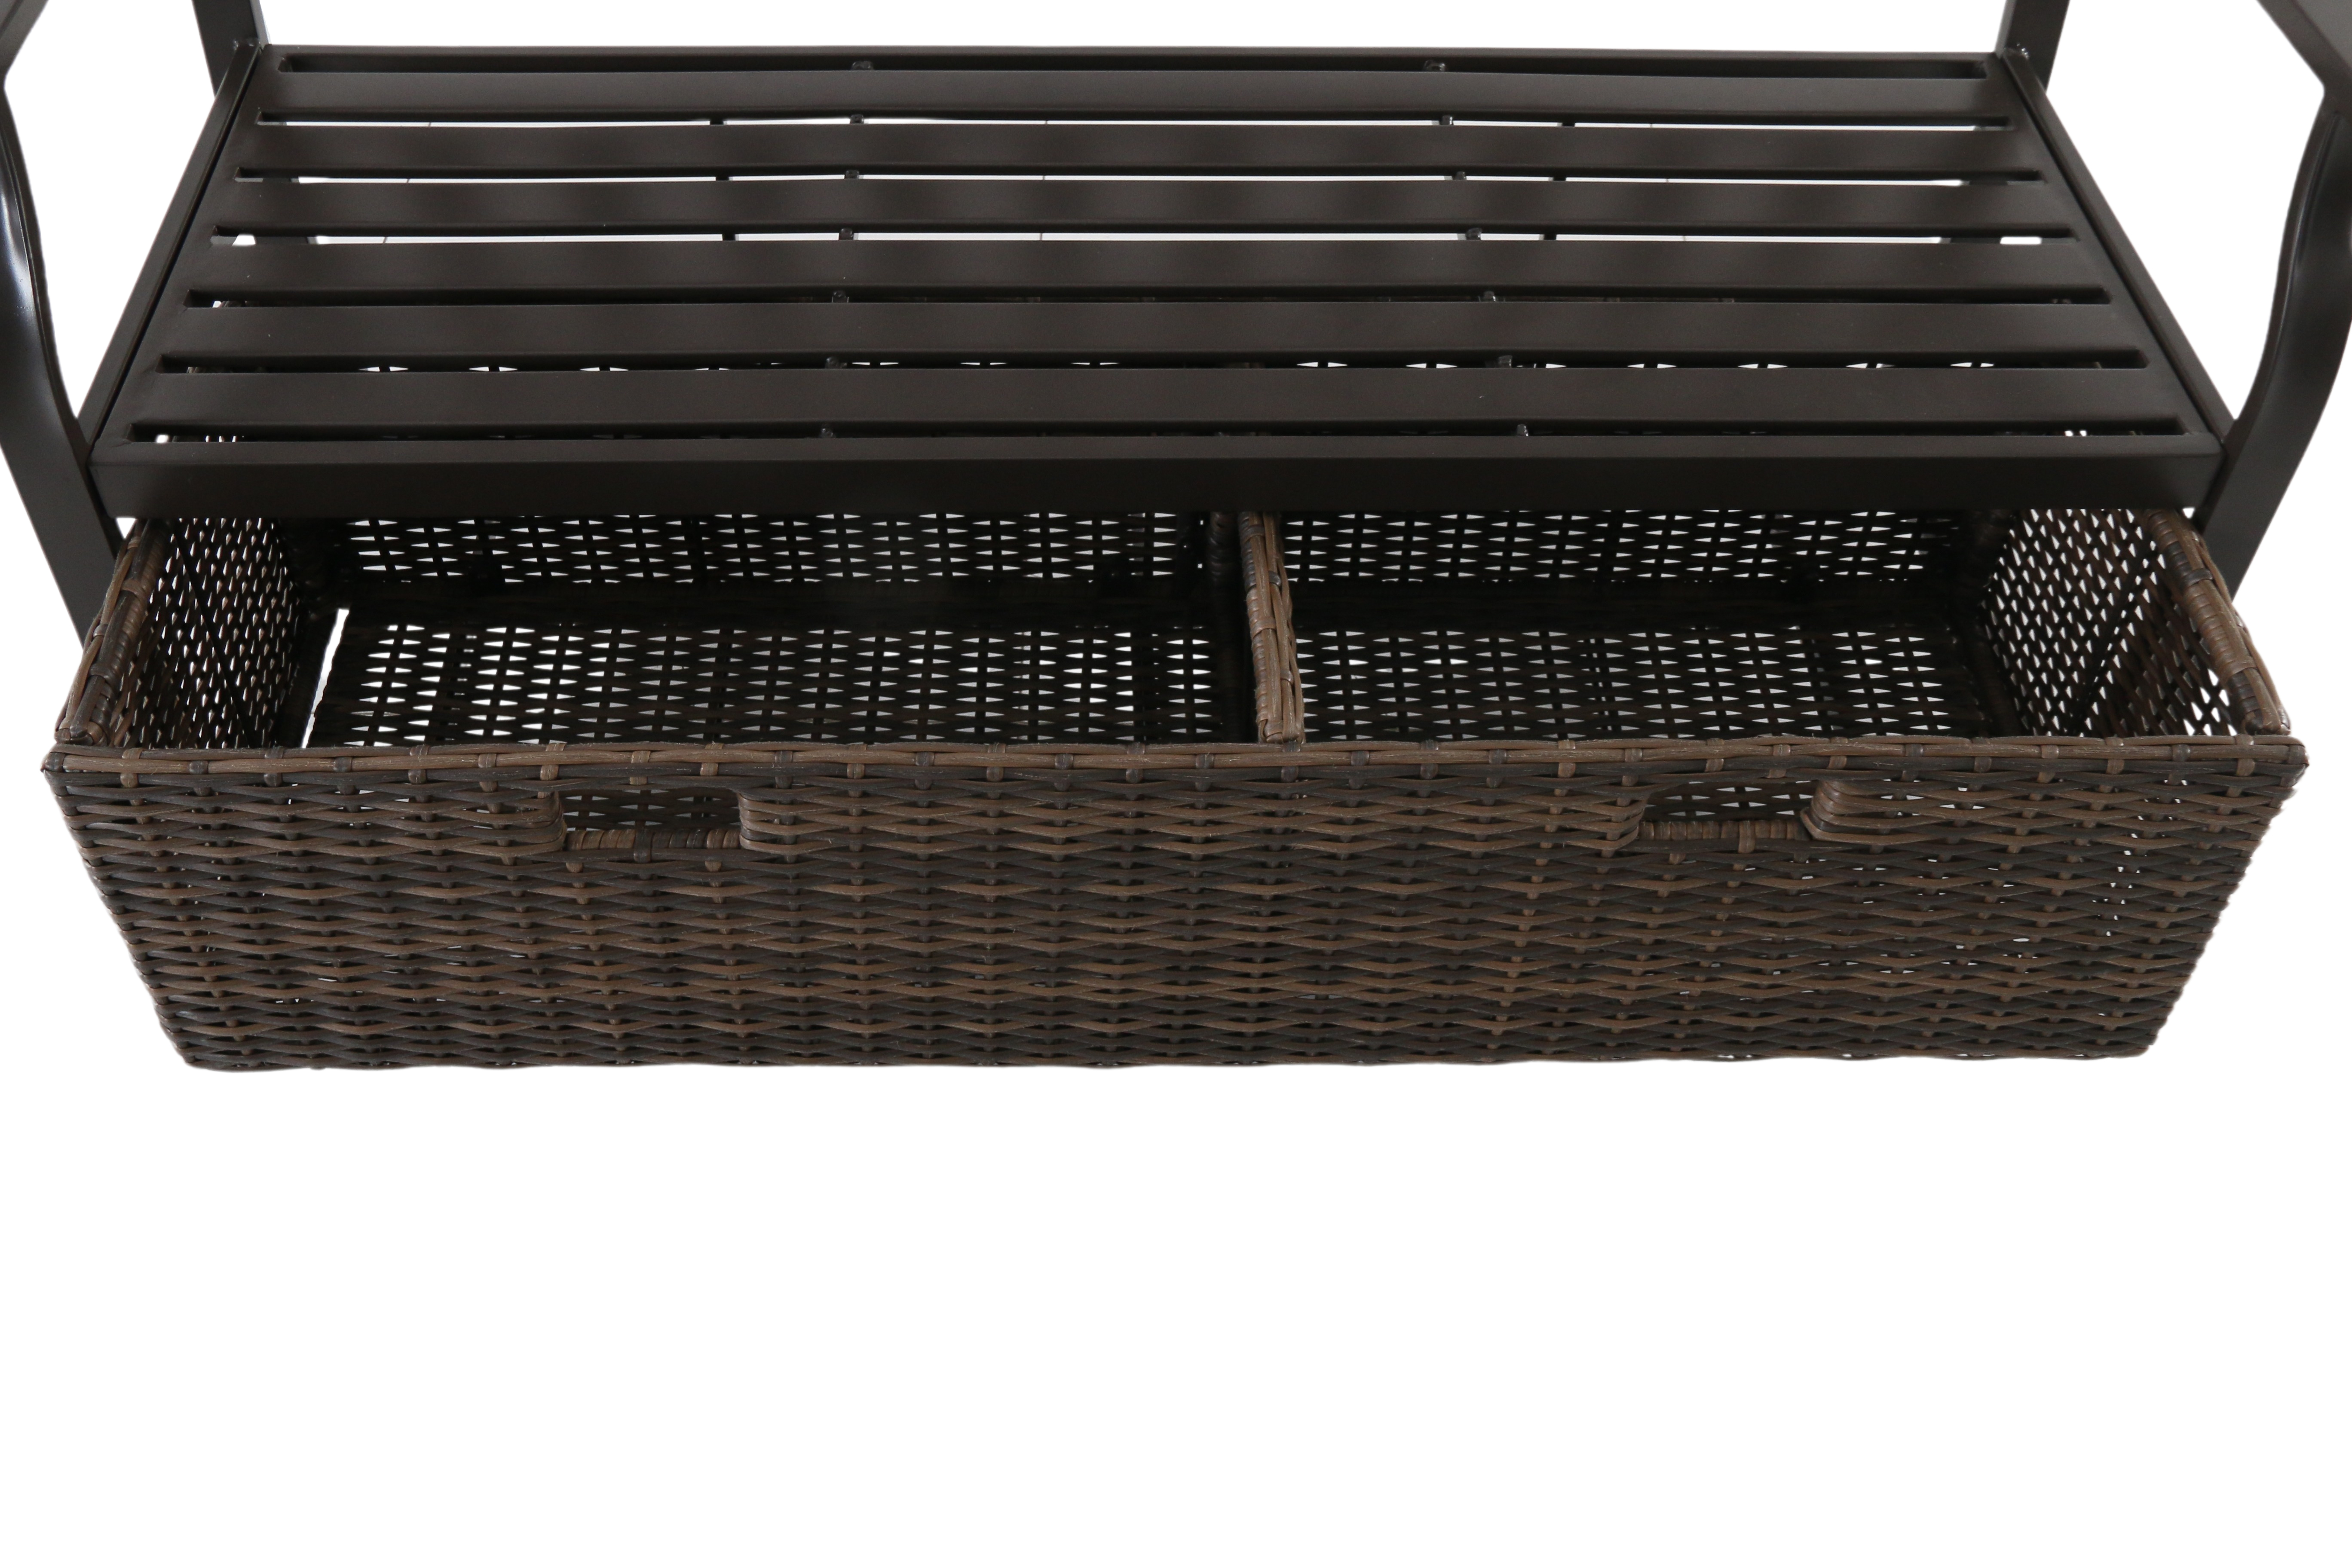 Better Homes & Gardens Camrose Farmhouse Steel Outdoor Bench with Wicker Storage Box, Bronze/Brown - image 5 of 11